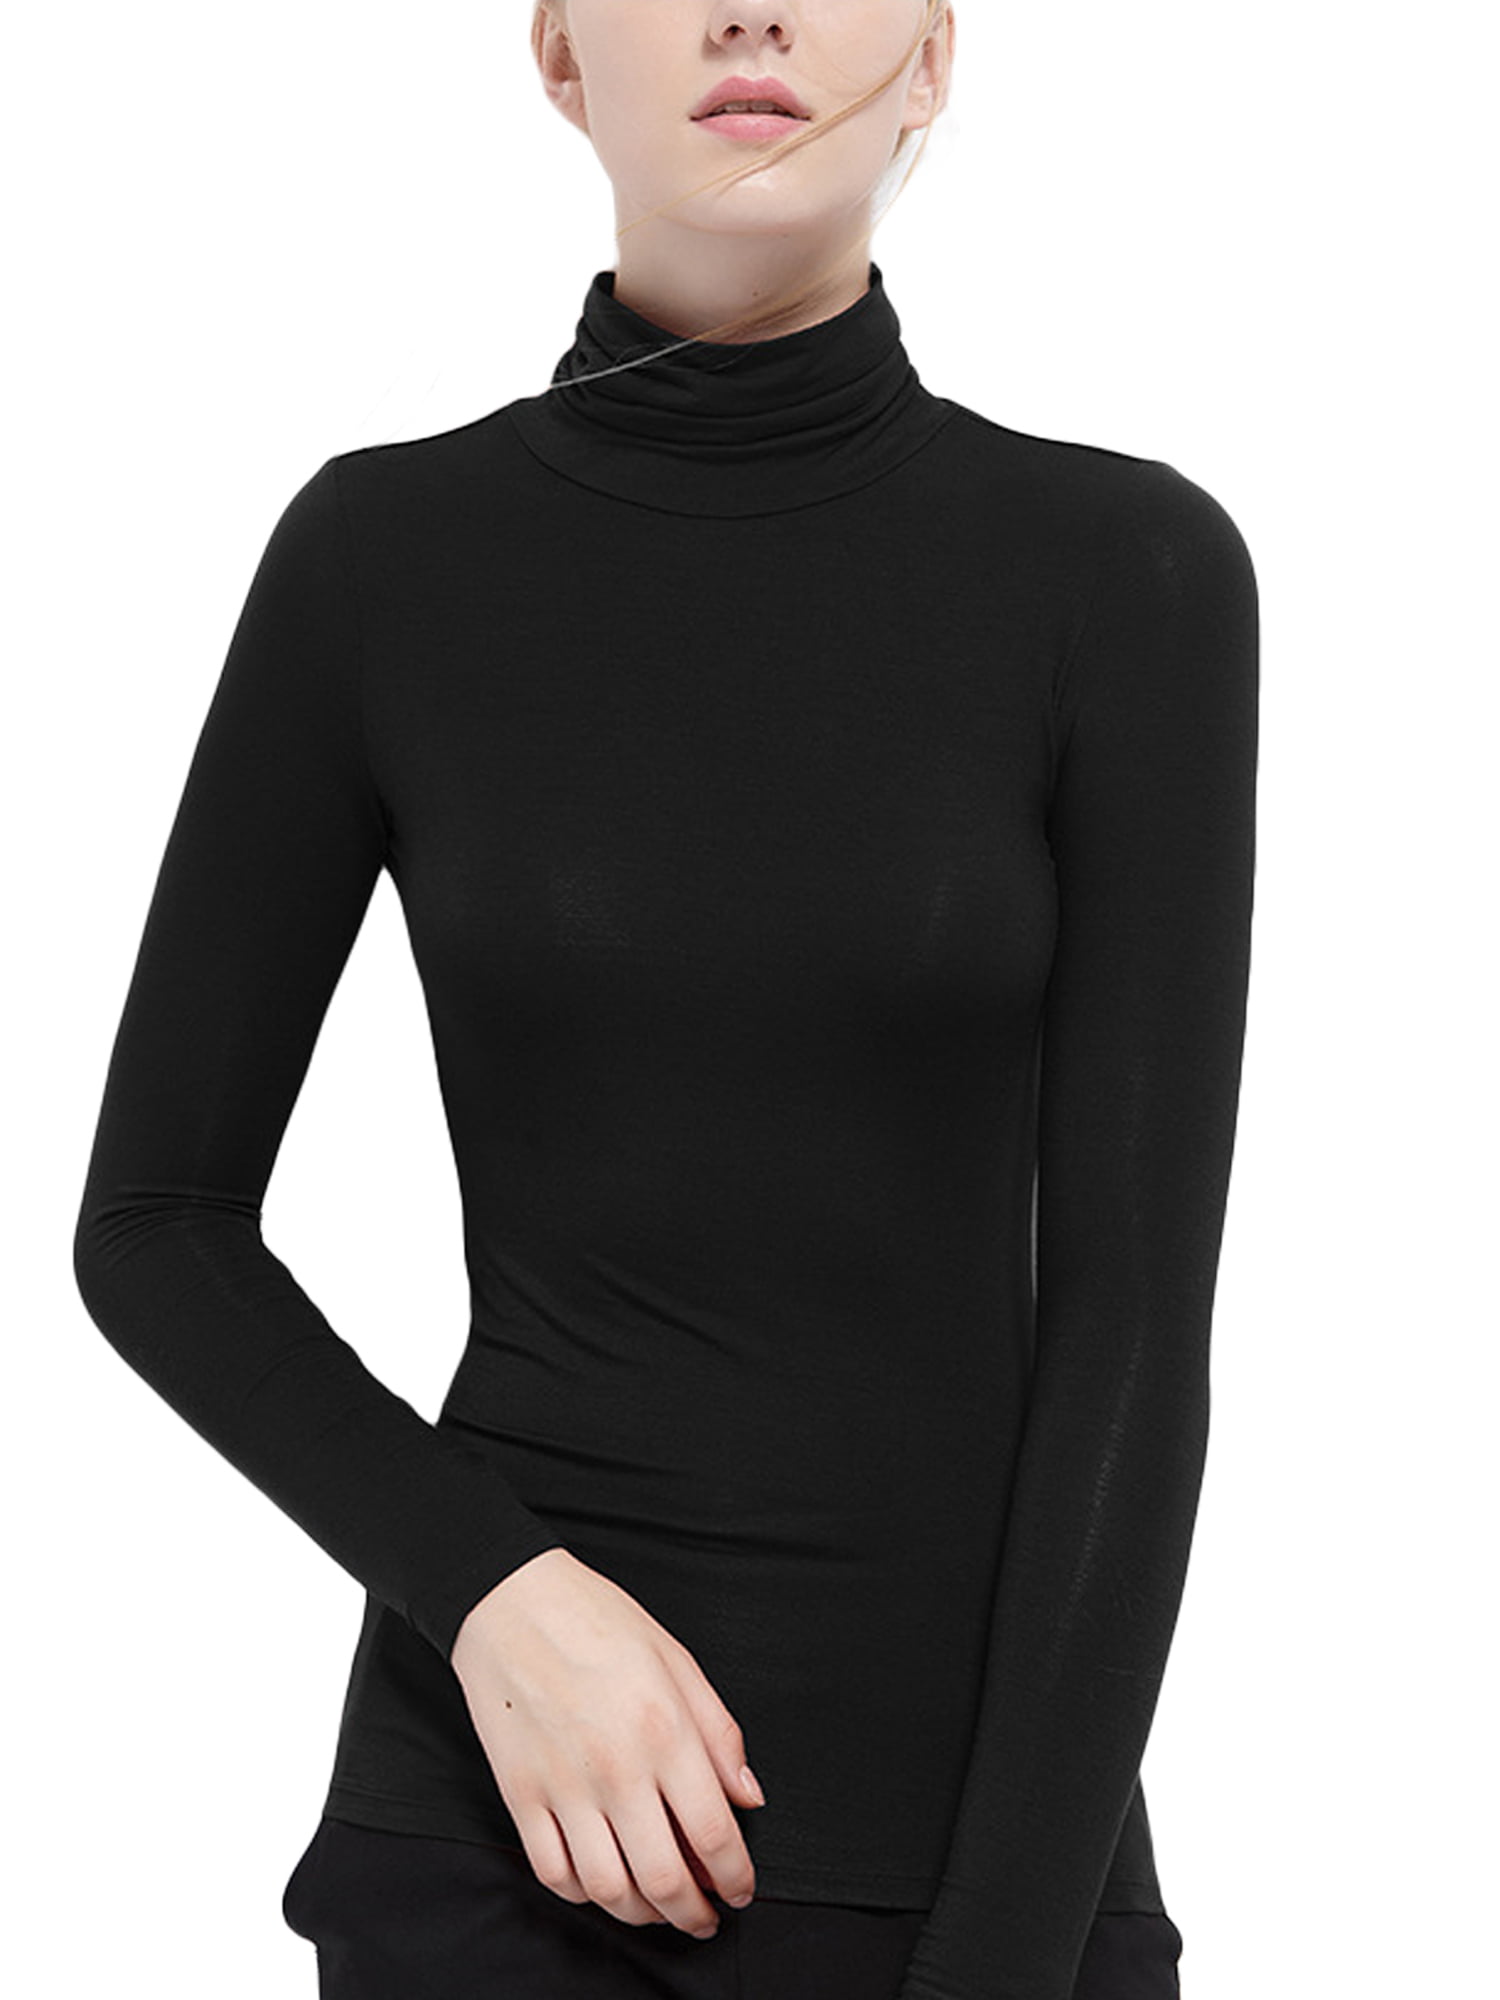 Musuos Women's Base Pullover, Long Sleeve Modal Turtleneck Tops Soft  Stretchy Slim Fitted Base Layer Shirts